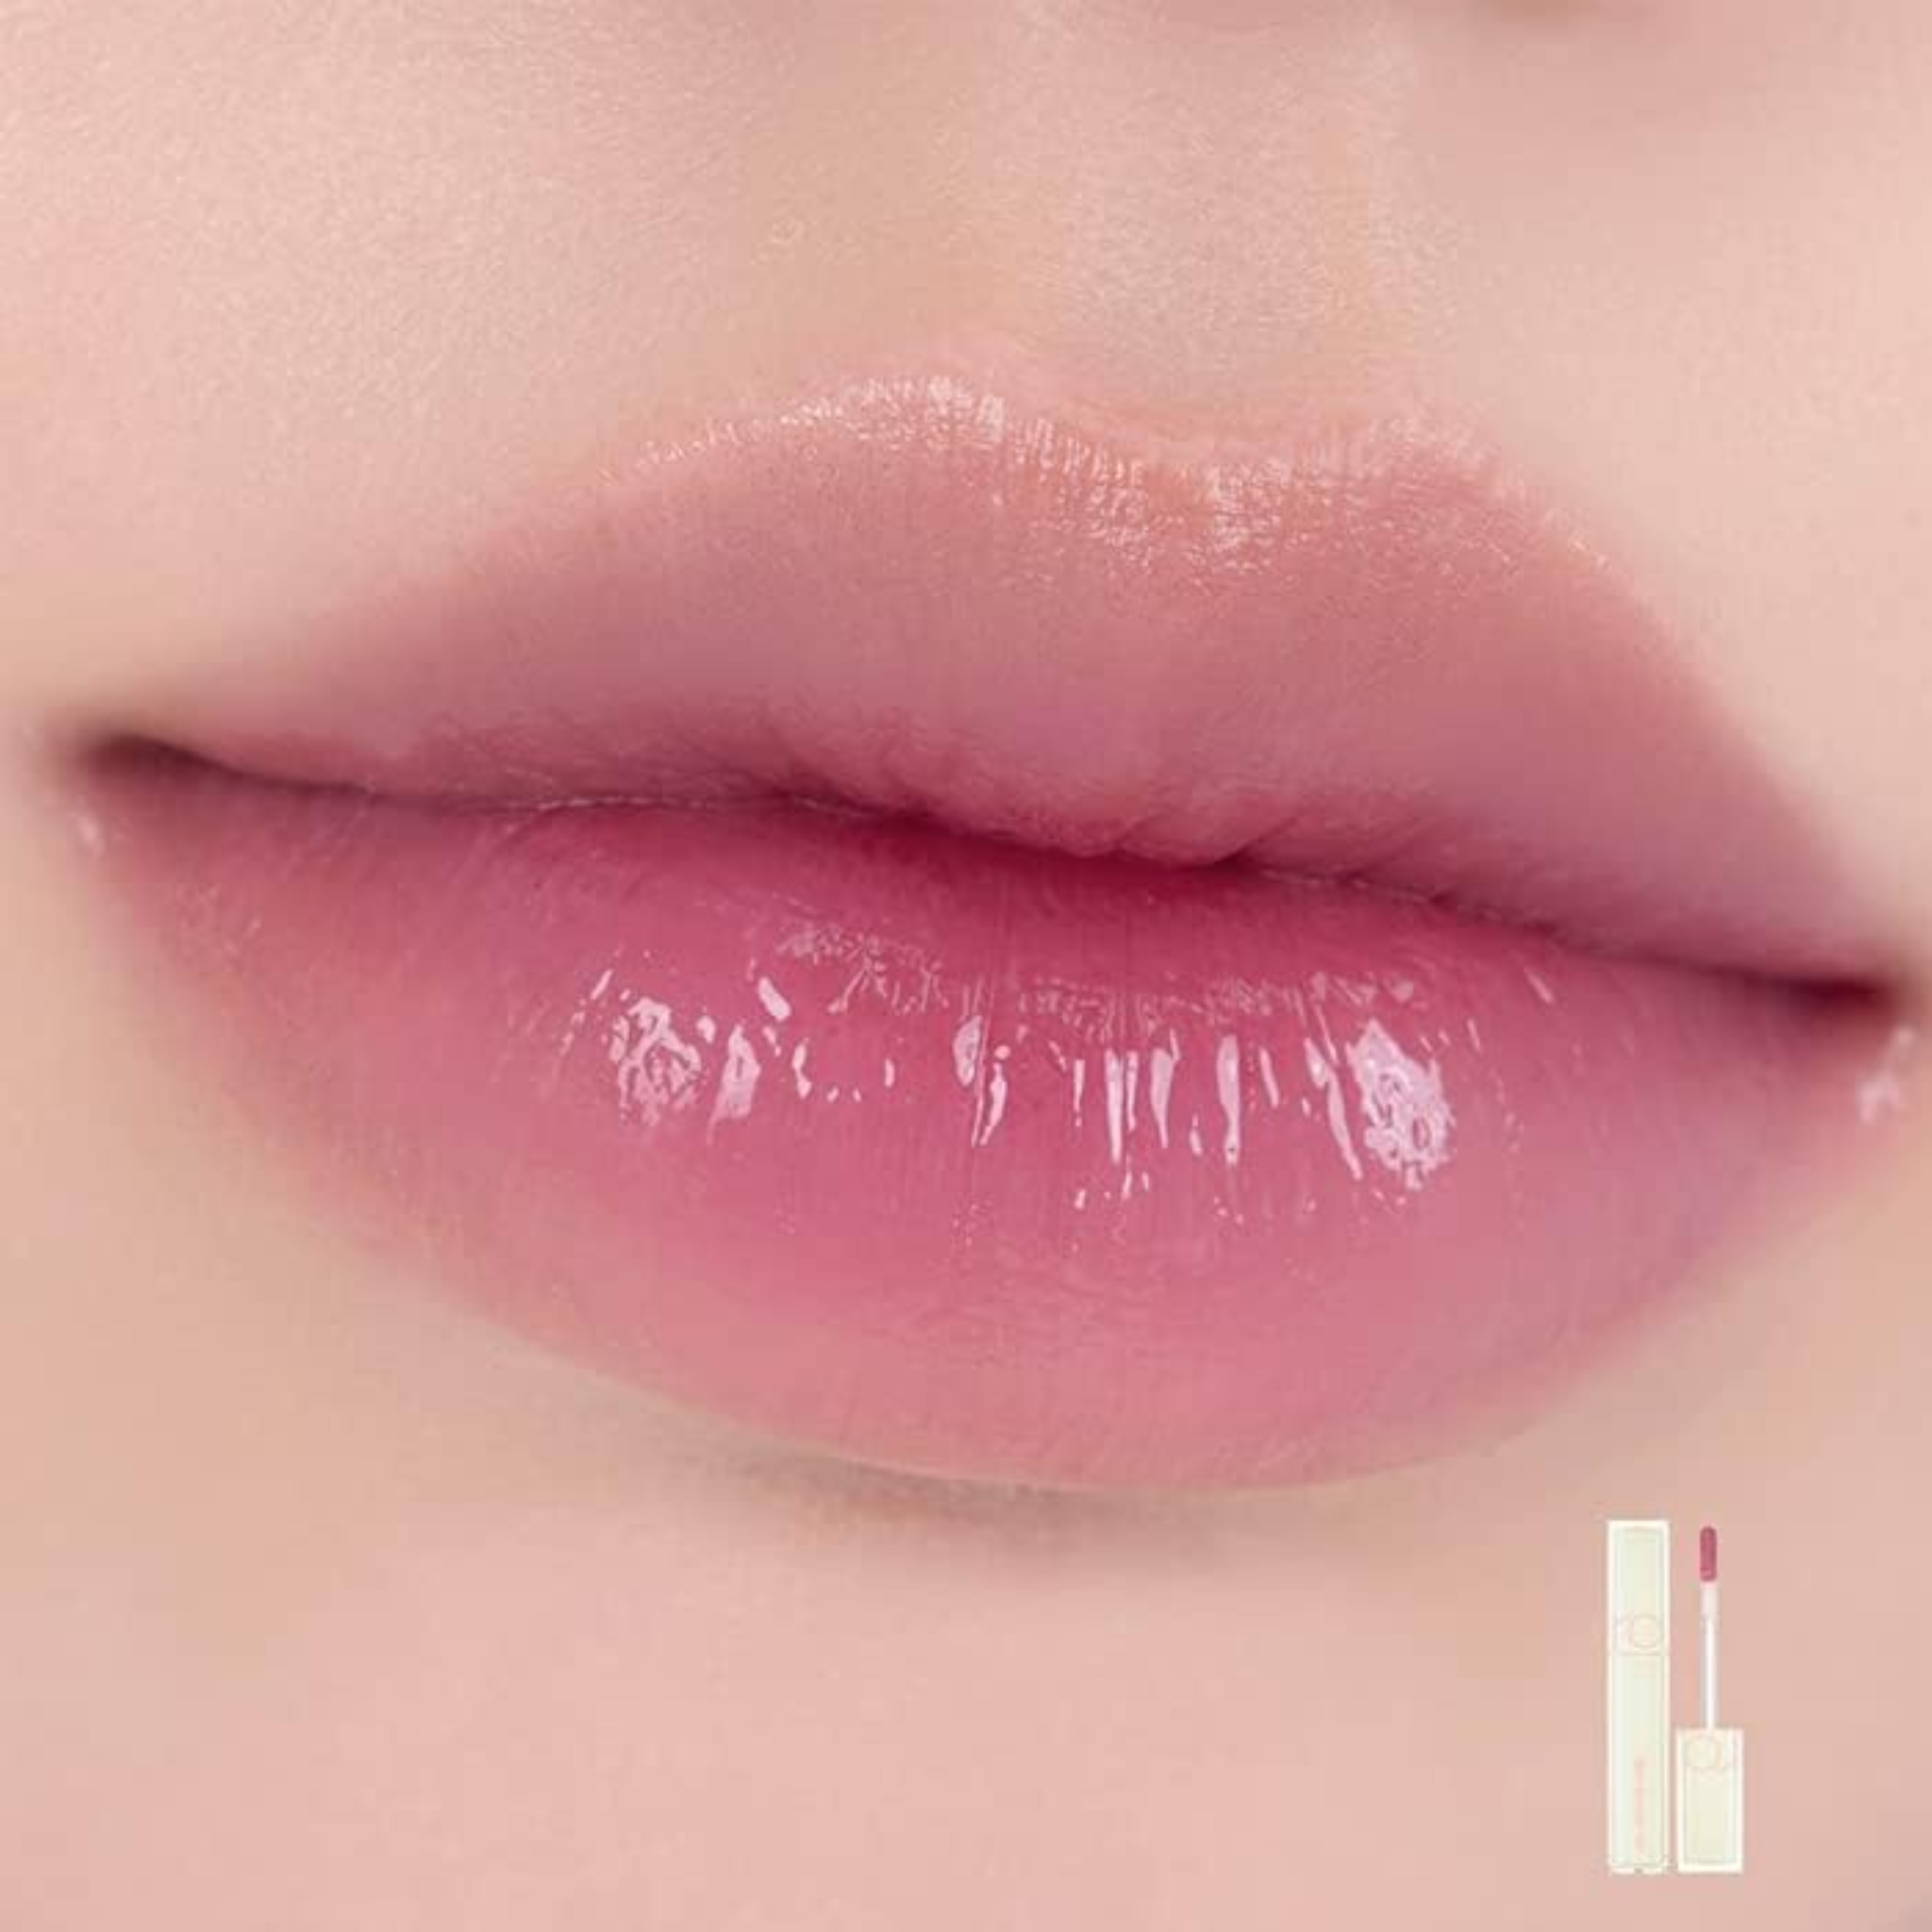 ROM&ND Dewyful Water Tint Milk Grocery Series - 3 Colours (5g)-lilac cream 11 on lips